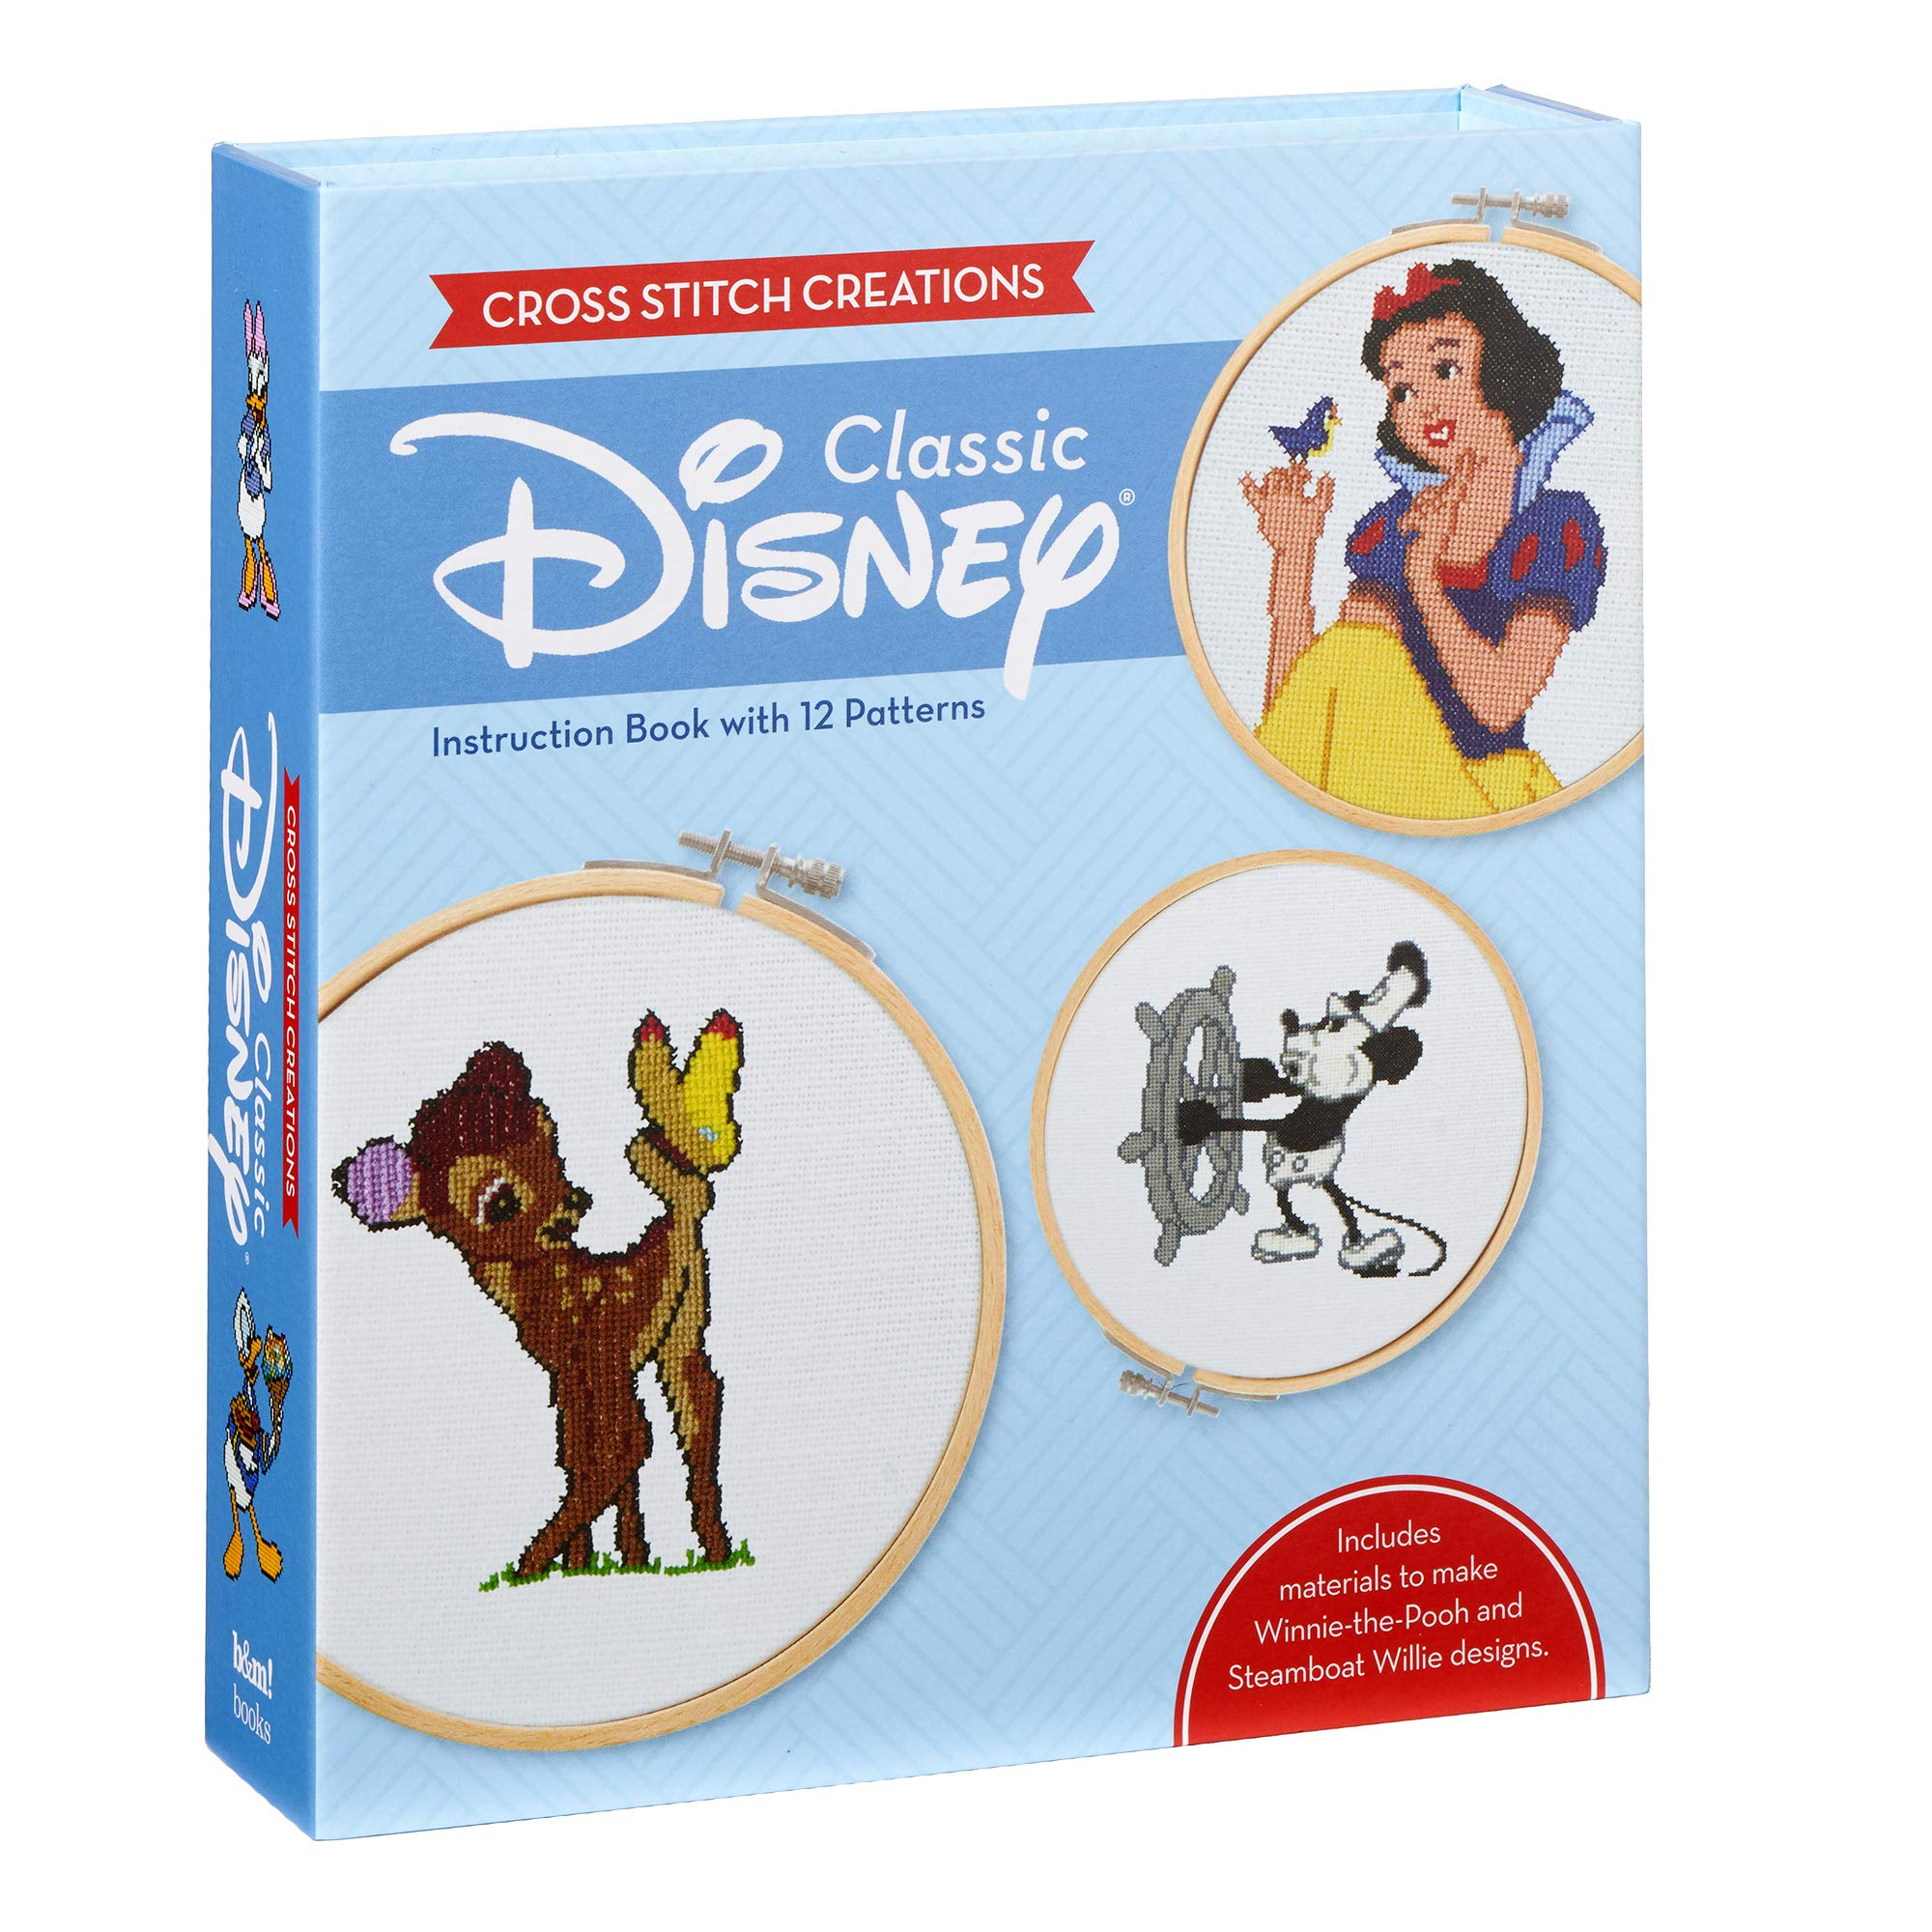 Disney Embroidery Patterns Disney Embroidery Patterns Free Embroidery Patterns